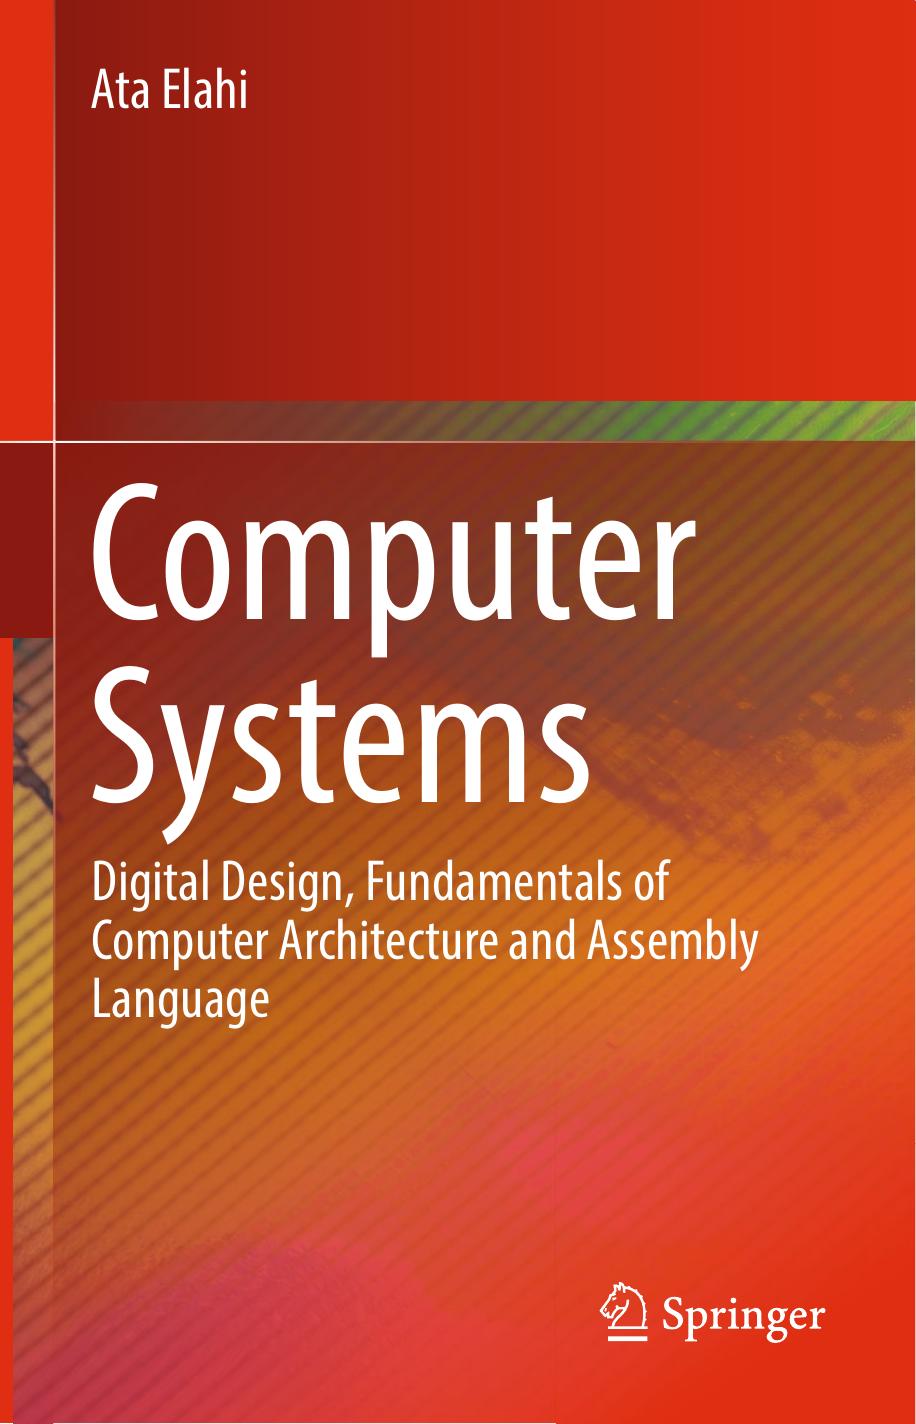 Computer Systems  Digital Design, Fundamentals of Computer Architecture and Assembly Language, 2018